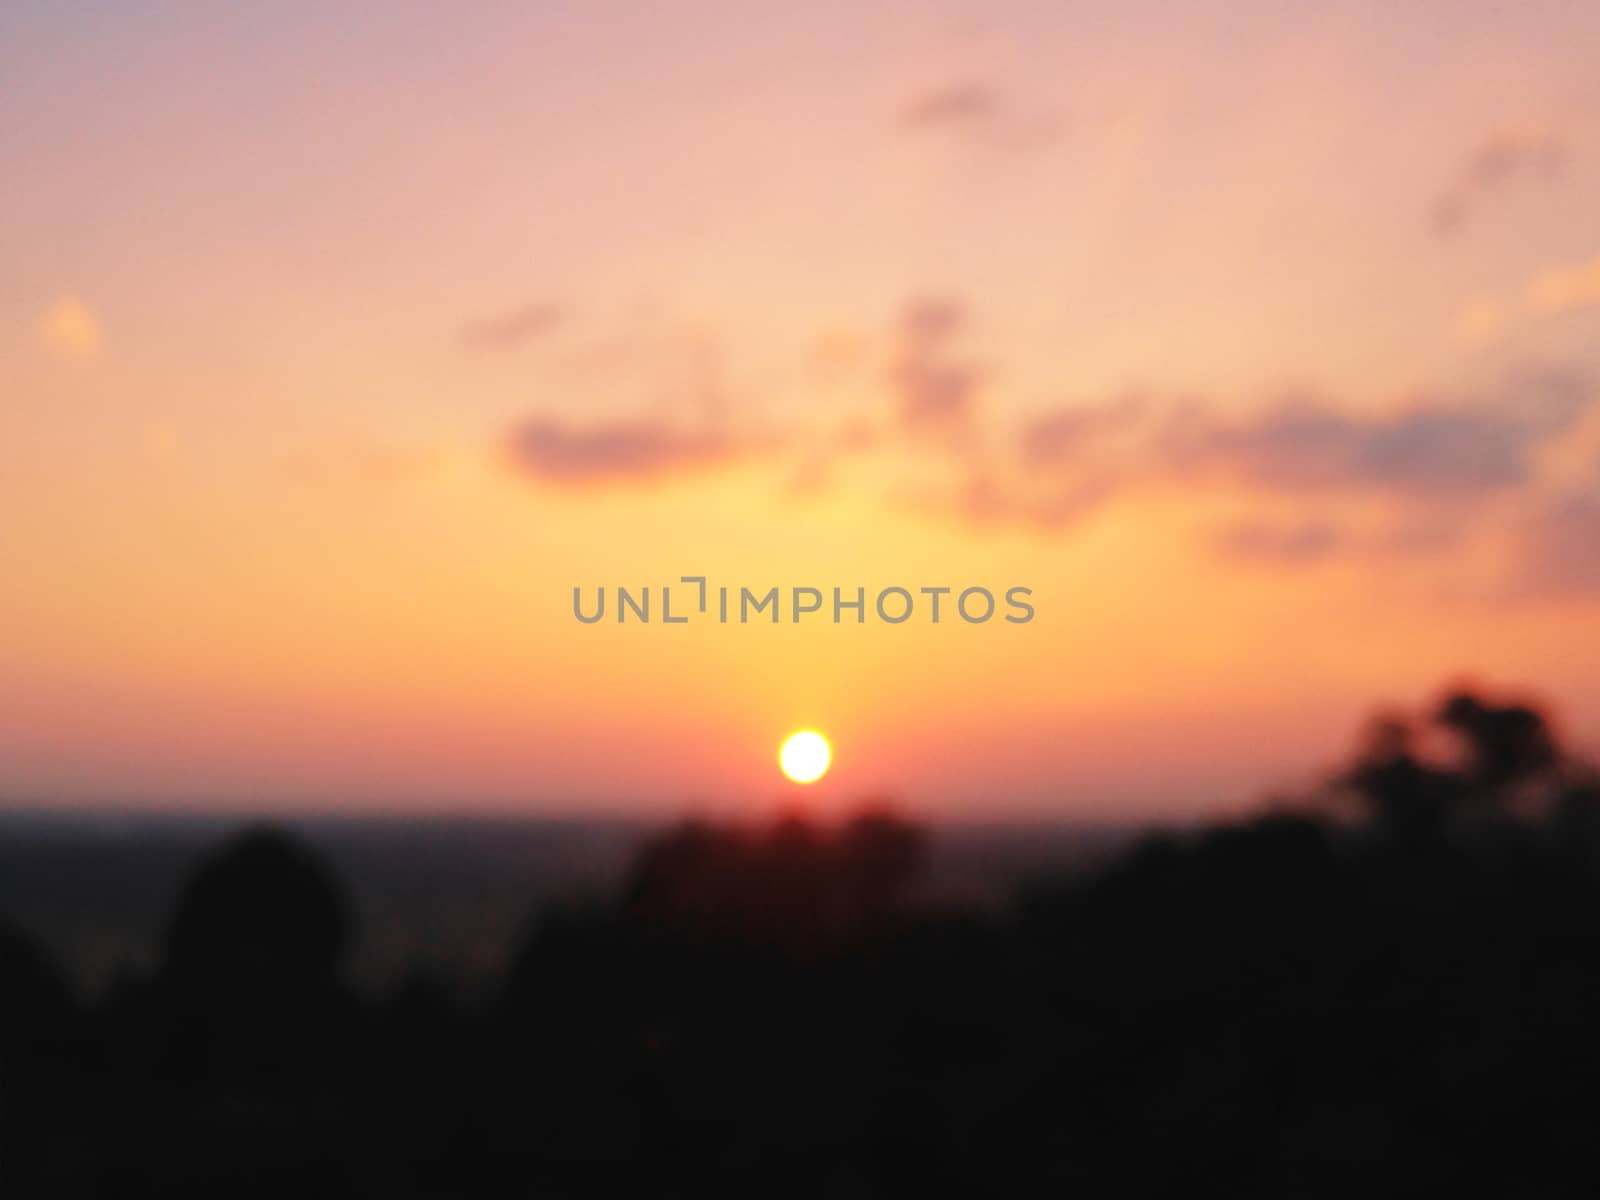 Defocused colorful sunset background, abstract nature by orsor